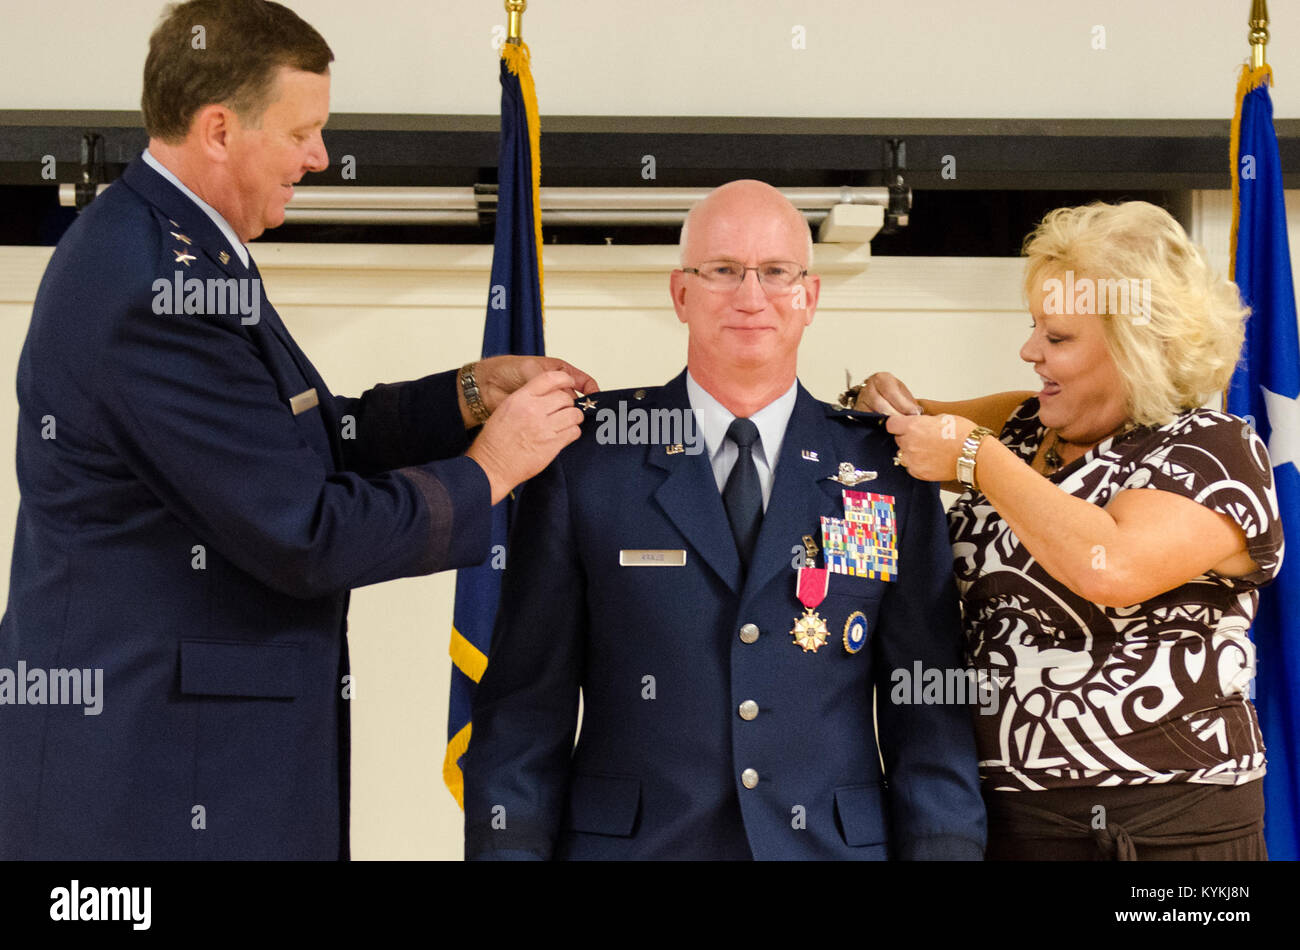 Maj. Gen. Mark Kraus’ wife (right) and Kentucky's adjutant general, Maj. Gen. Edward Tonini, pin the rank insignia of major general to Kraus’ uniform during a promotion ceremony at the Kentucky Air National Guard Base in Louisville, Ky., Aug. 18, 2013. Kraus is a Kentucky Air Guardsman who serves as Air National Guard assistant to the commander of U.S. Air Forces Central. (U.S. Air National Guard photo by Airman Joshua Horton) Stock Photo